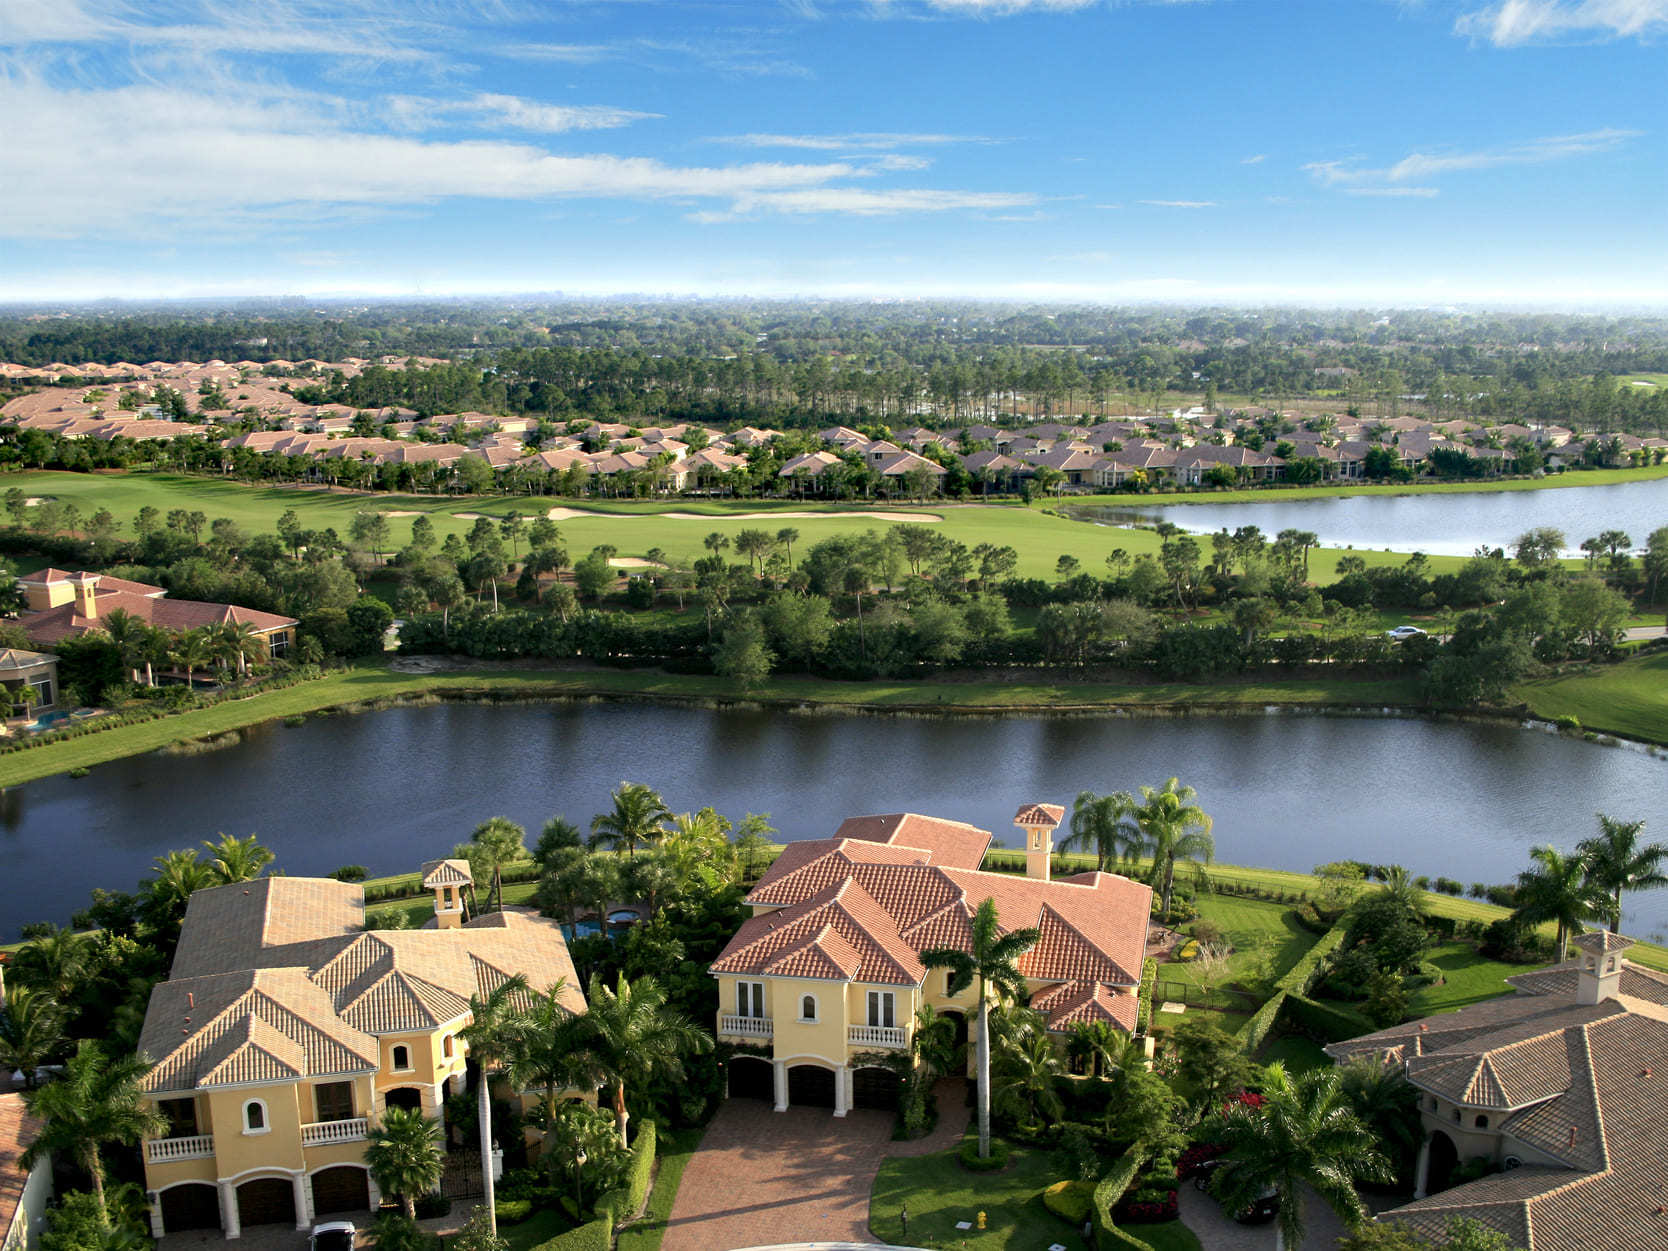 Florida vacation homes next to a golf course and waterway